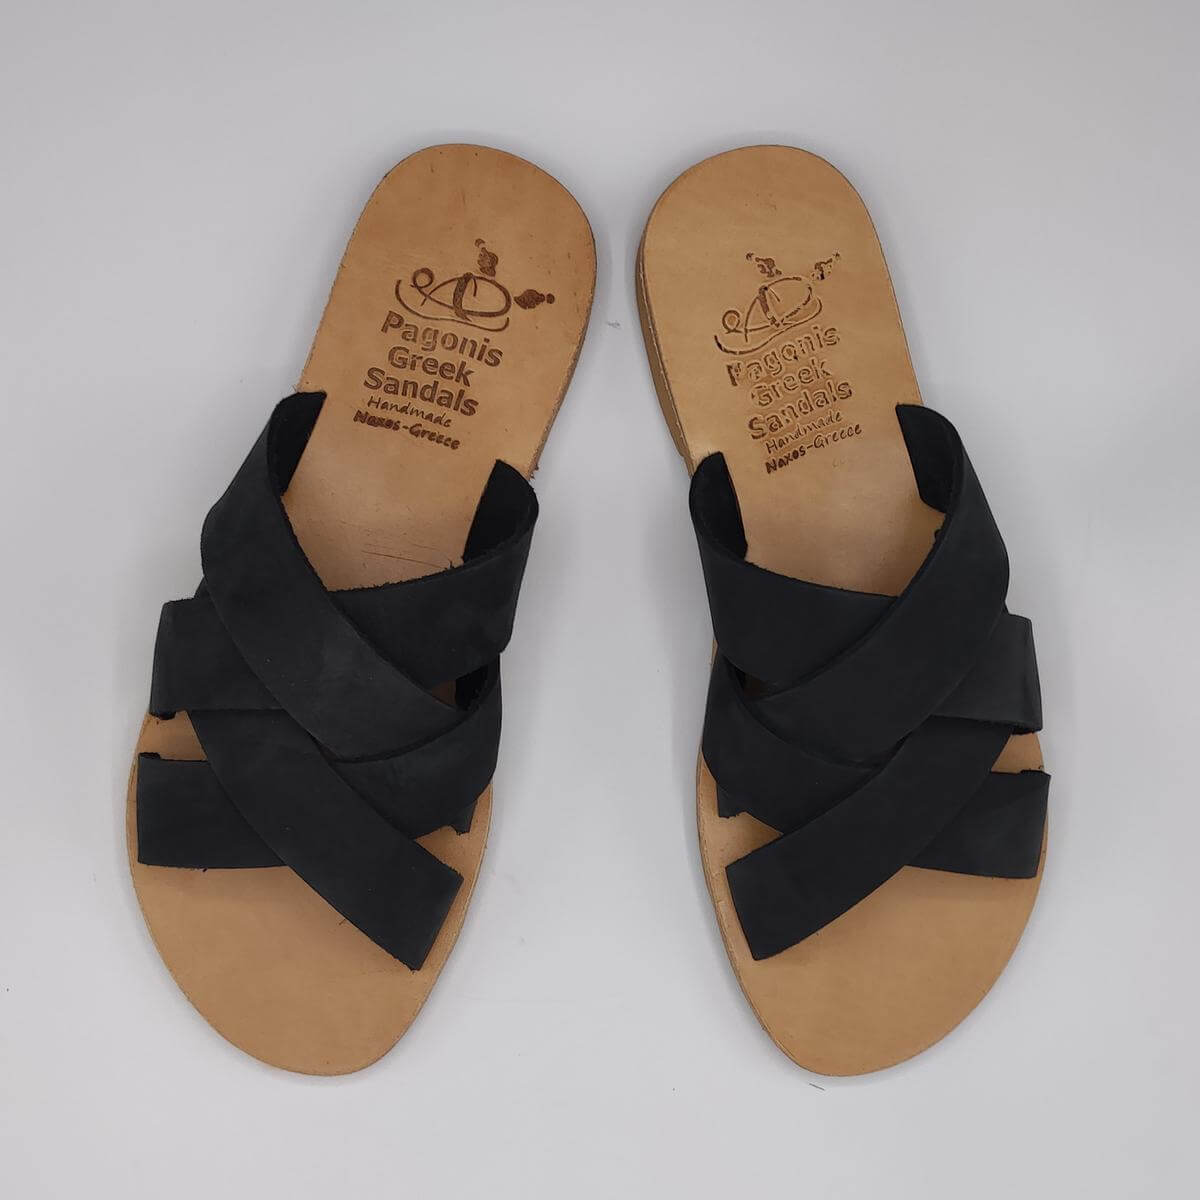 Criss Cross Woven Leather Slides Pagonis Nubuck Black